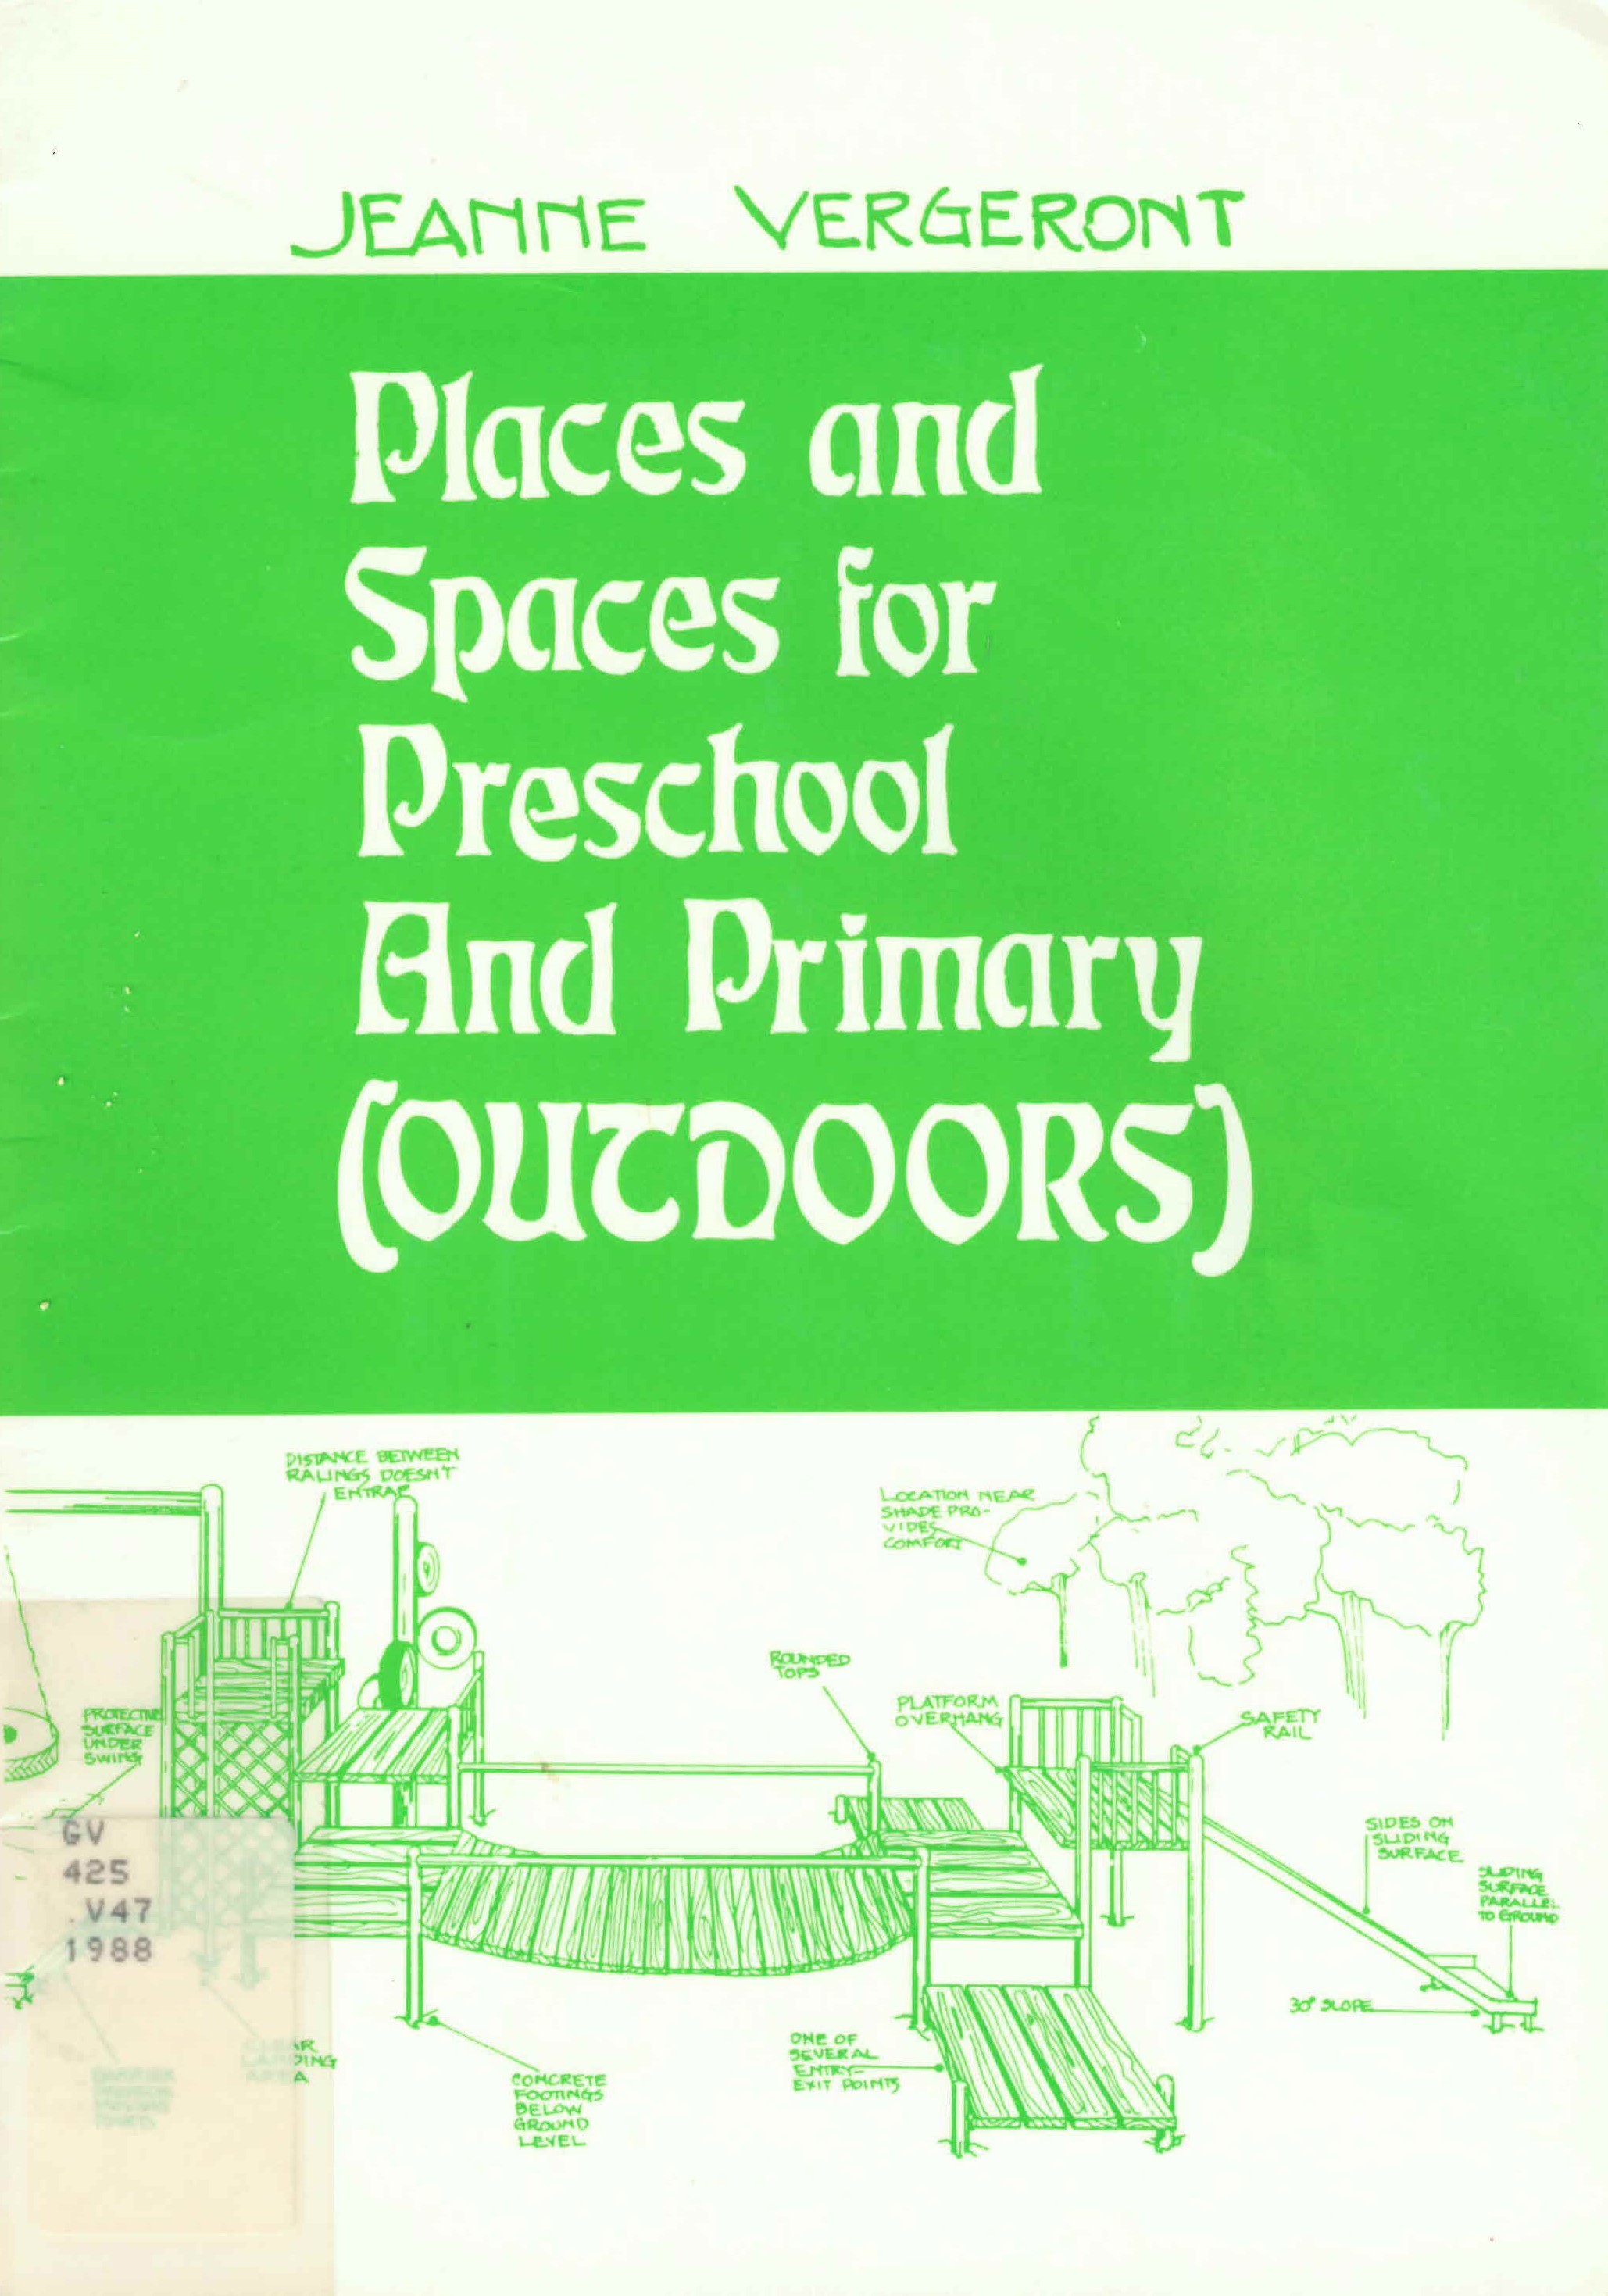 Places and spaces for preschool and primary (outdoors)